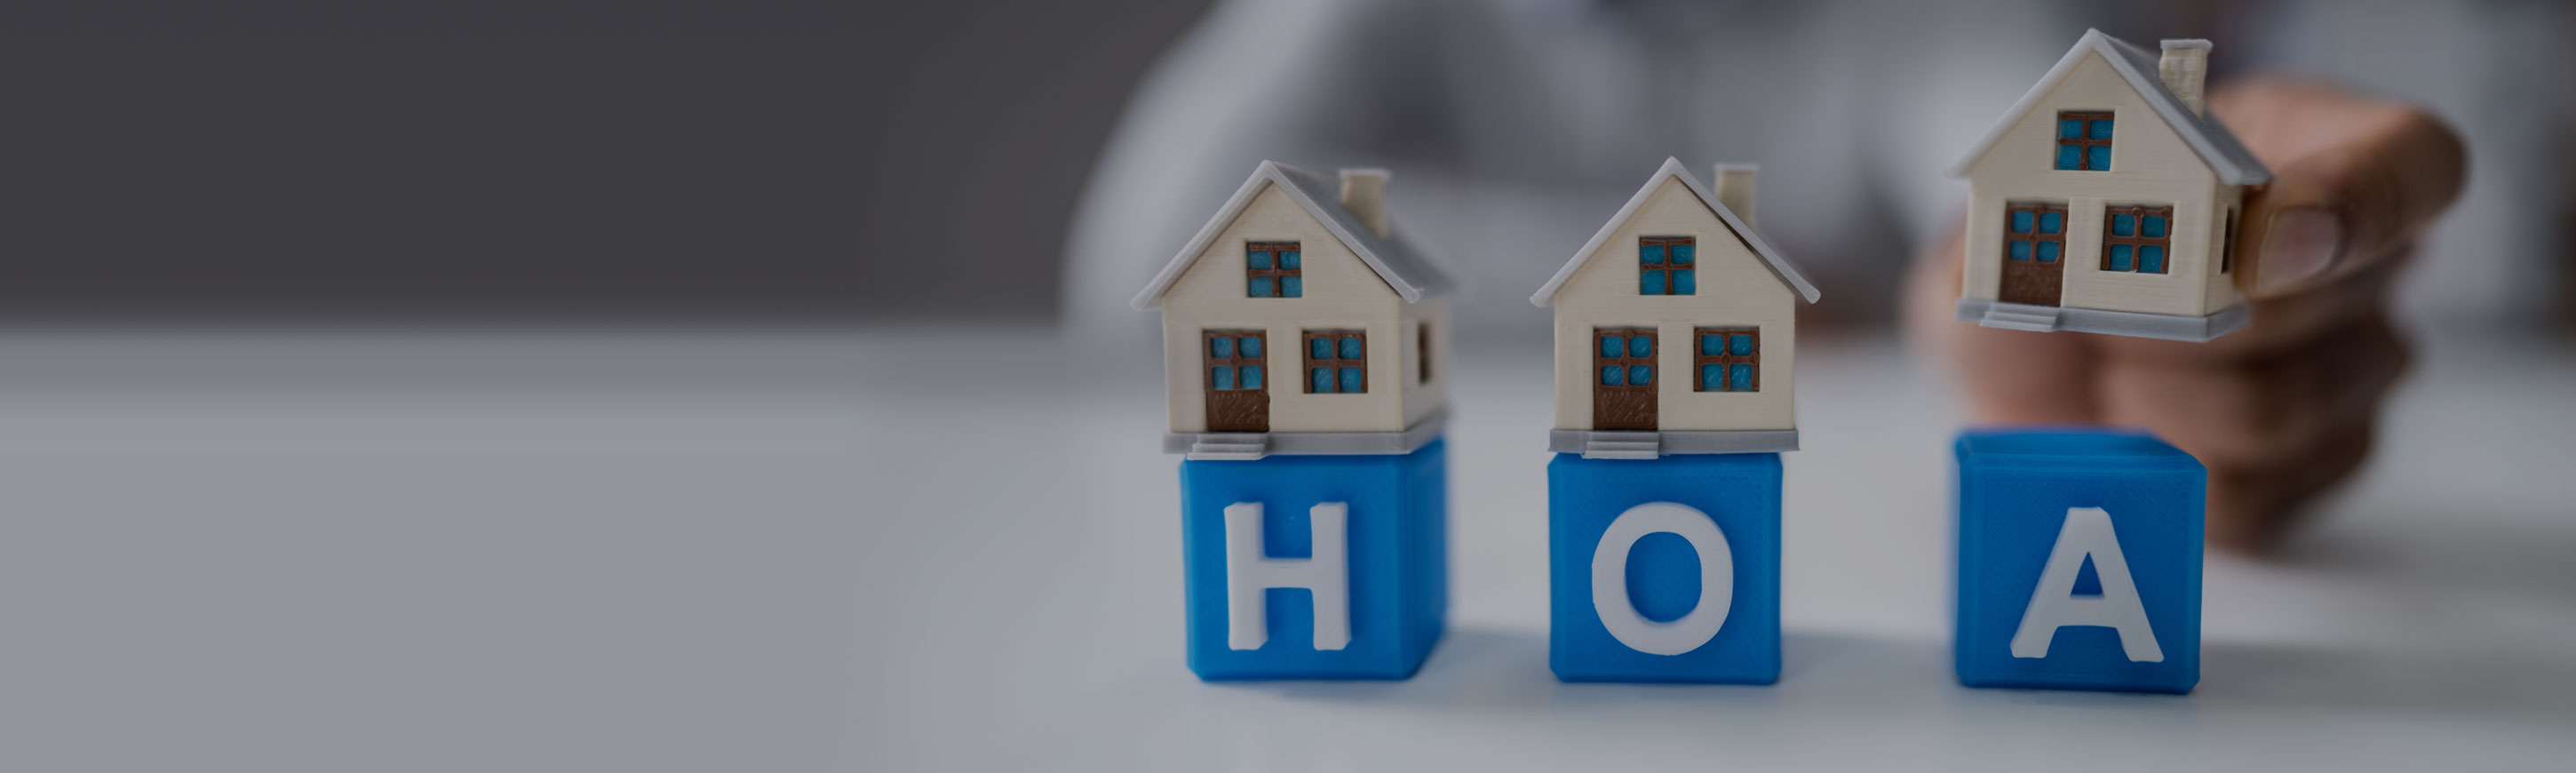 Blue letter blocks spelling out H O A